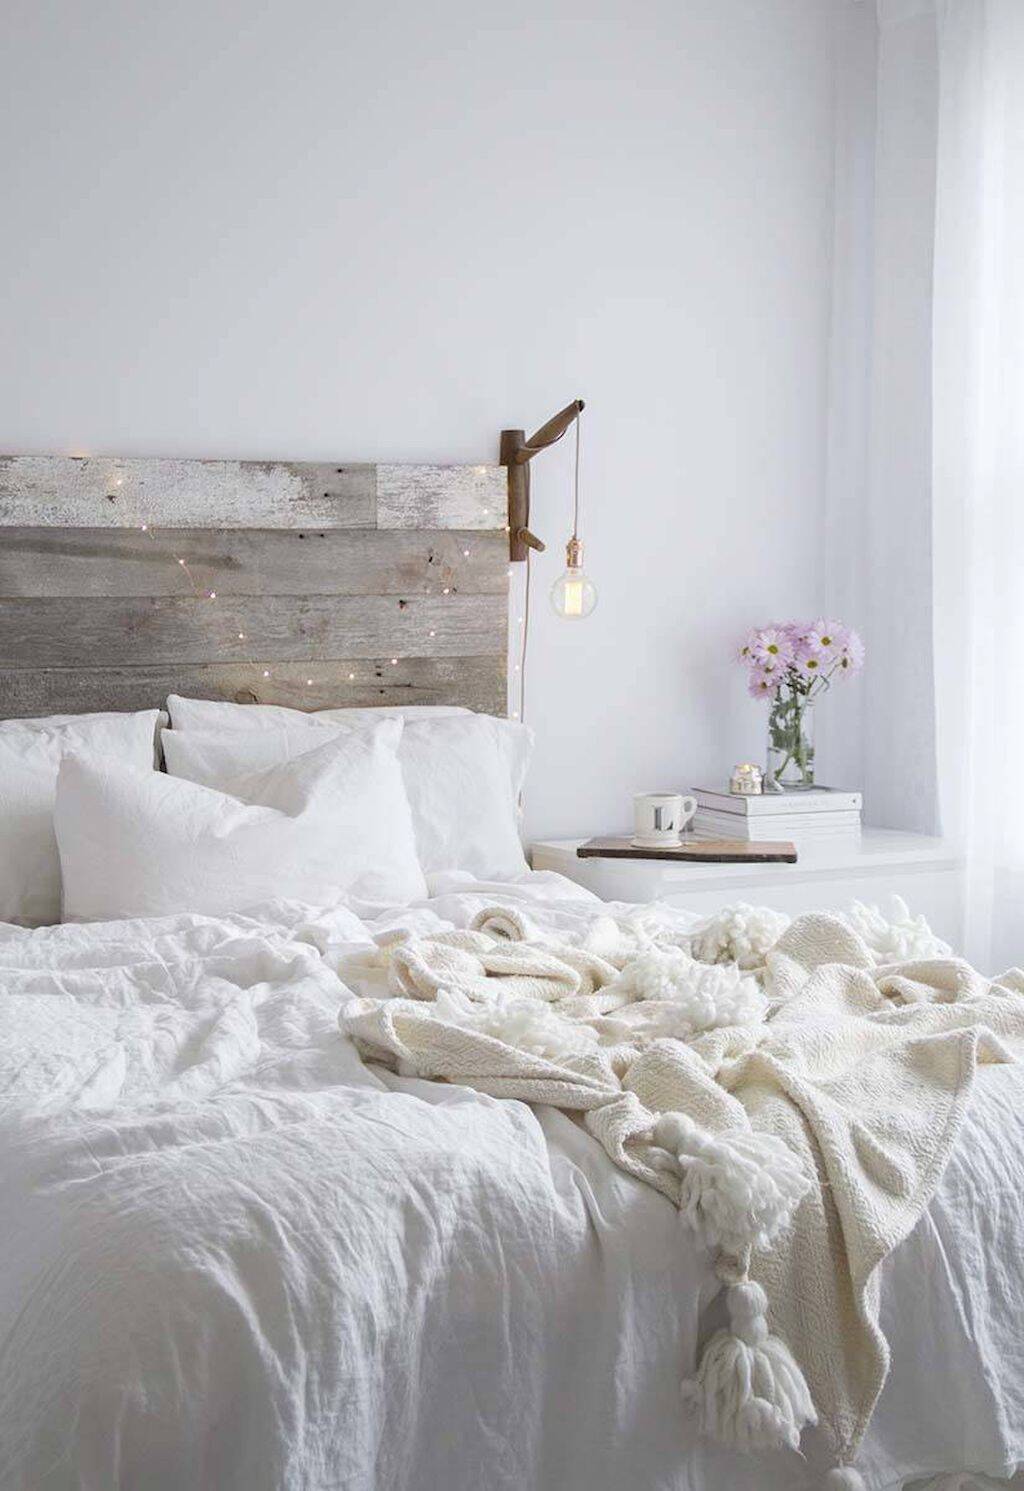 Softness, minimalism and delicacy are the elements making up a Scandinavian bedroom